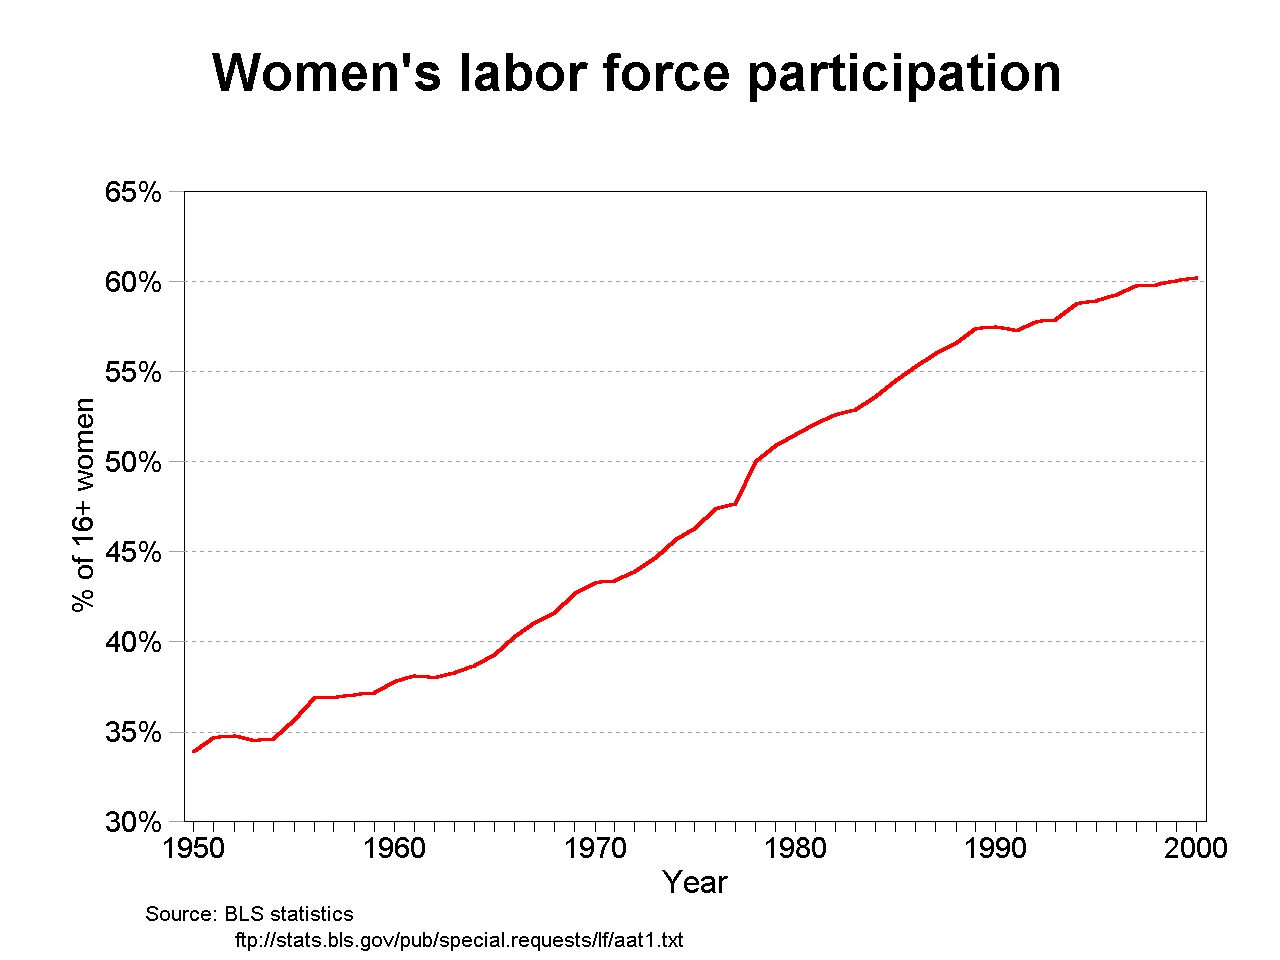 labor force participation by gender: trends(1950-2000) 